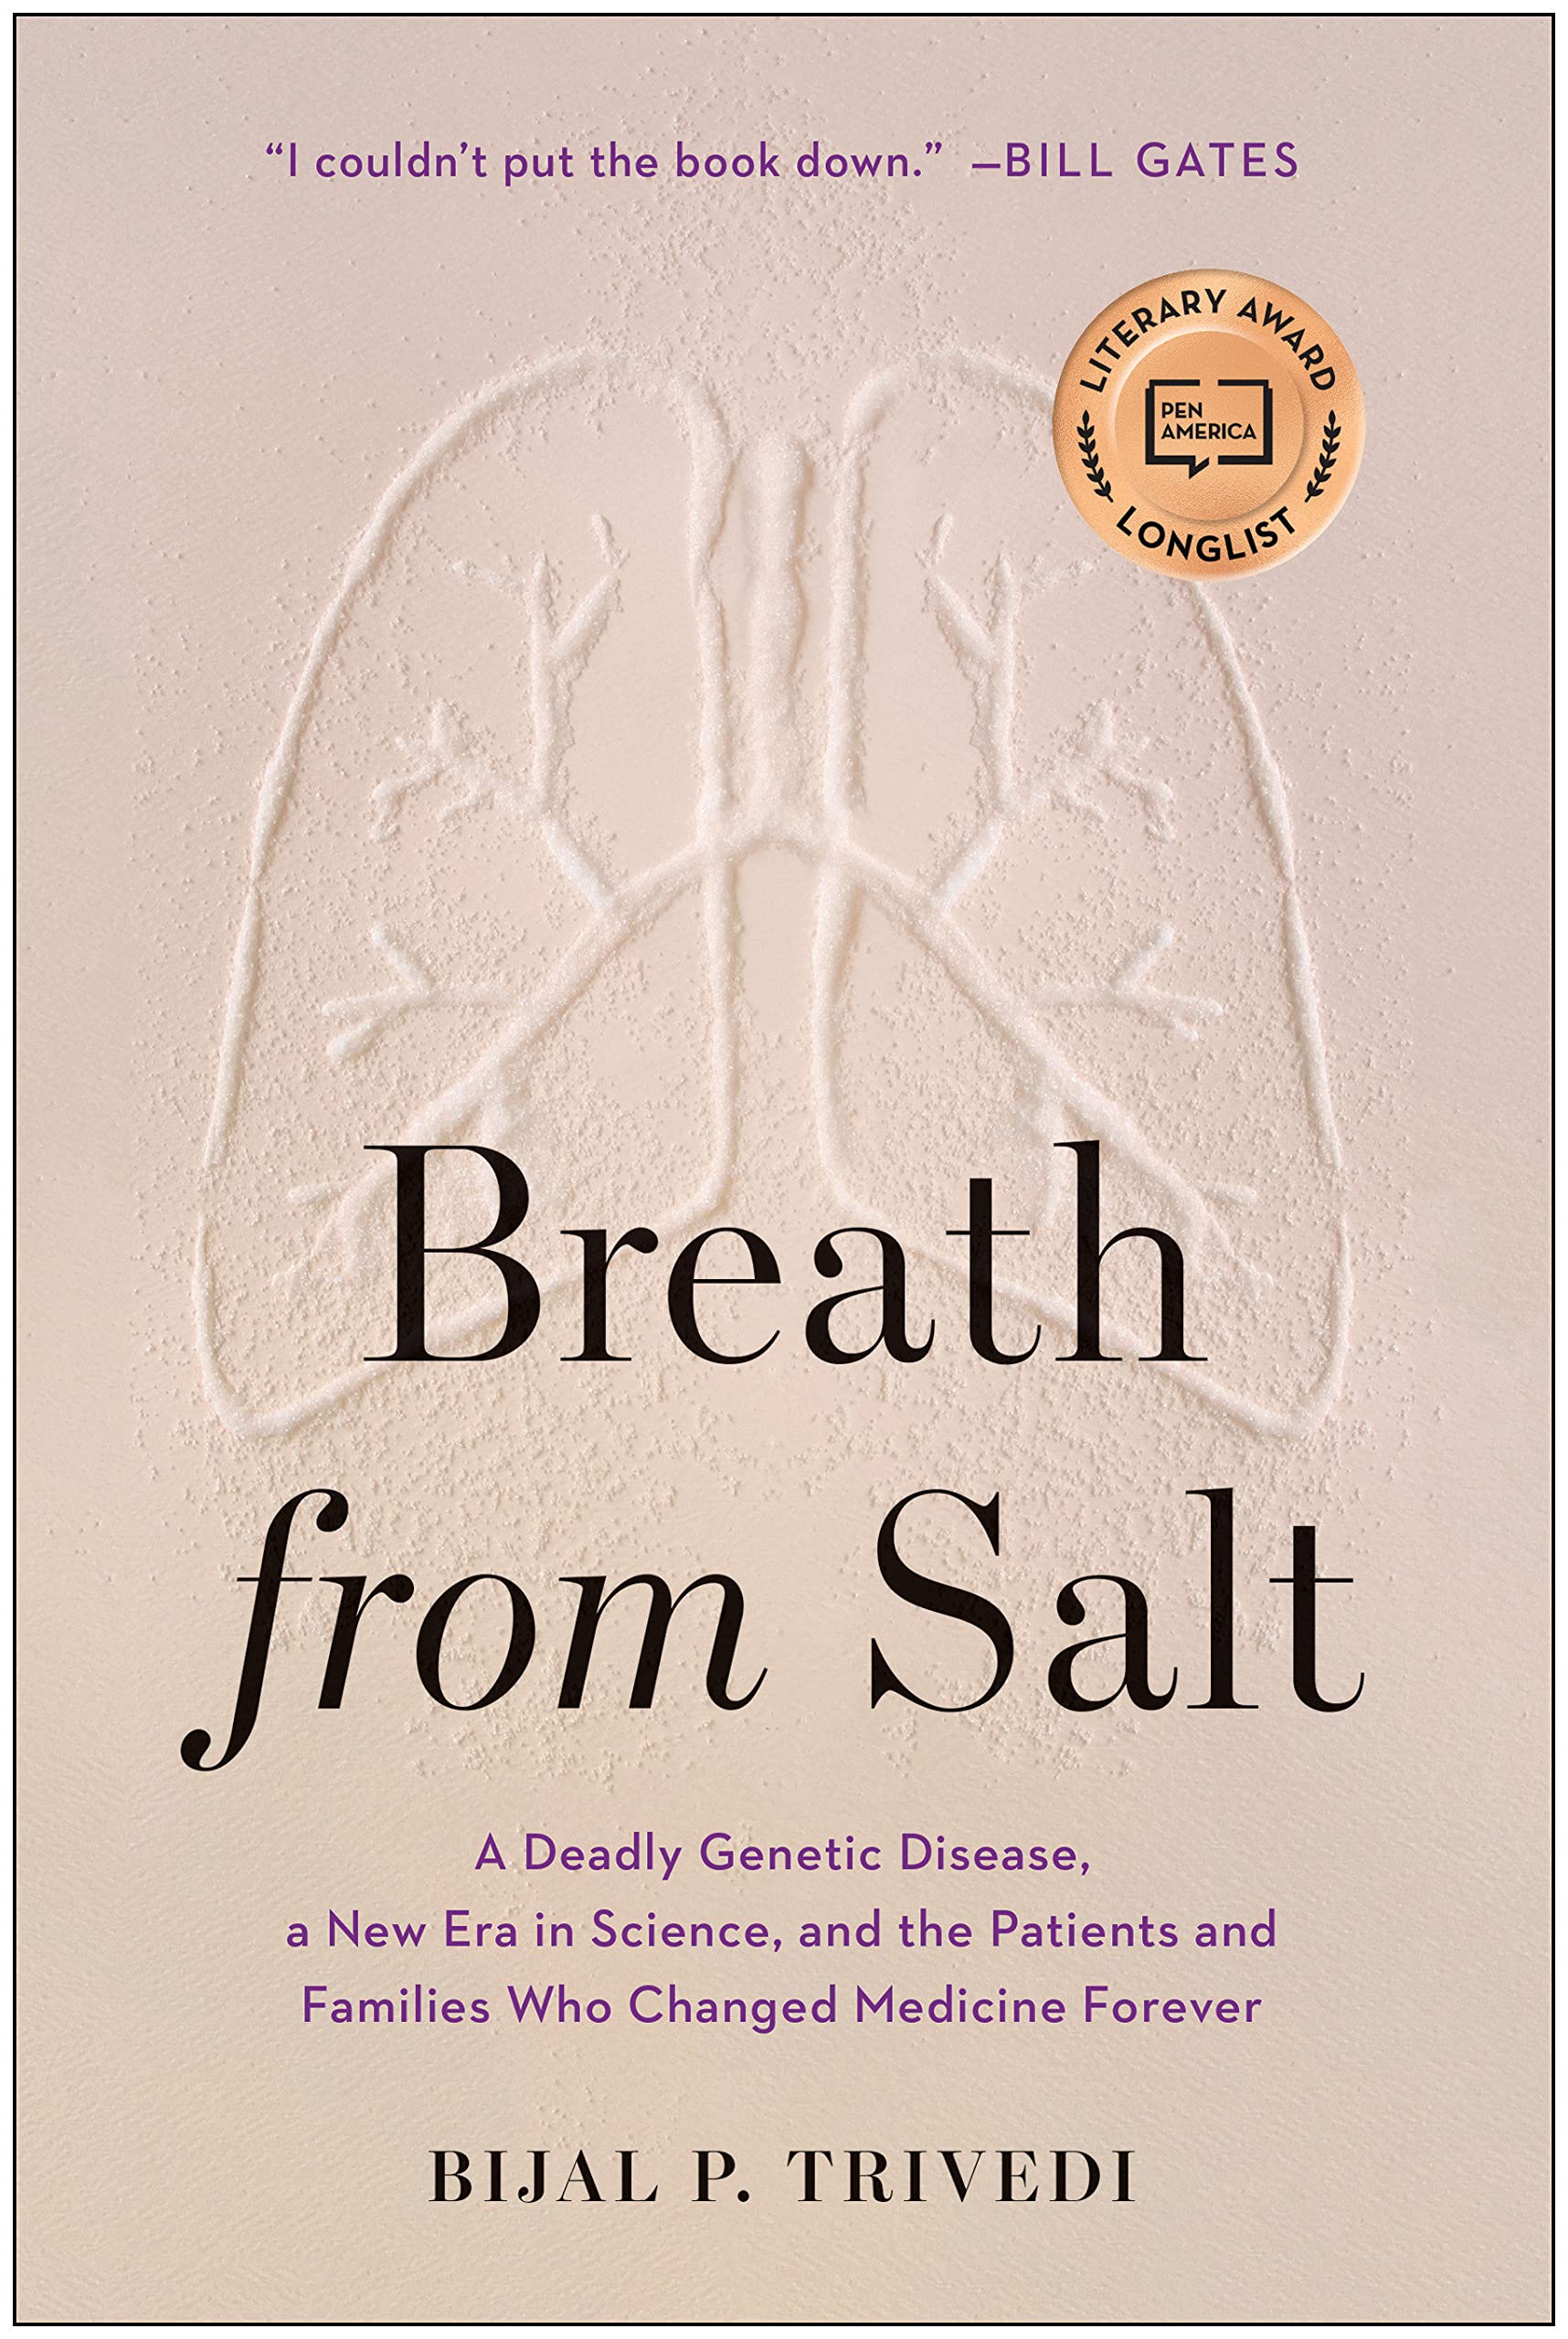 Breath from Salt A Deadly Genetic Disease, a New Era in Science, and the Patient and Families Who Changed Medicine Forever